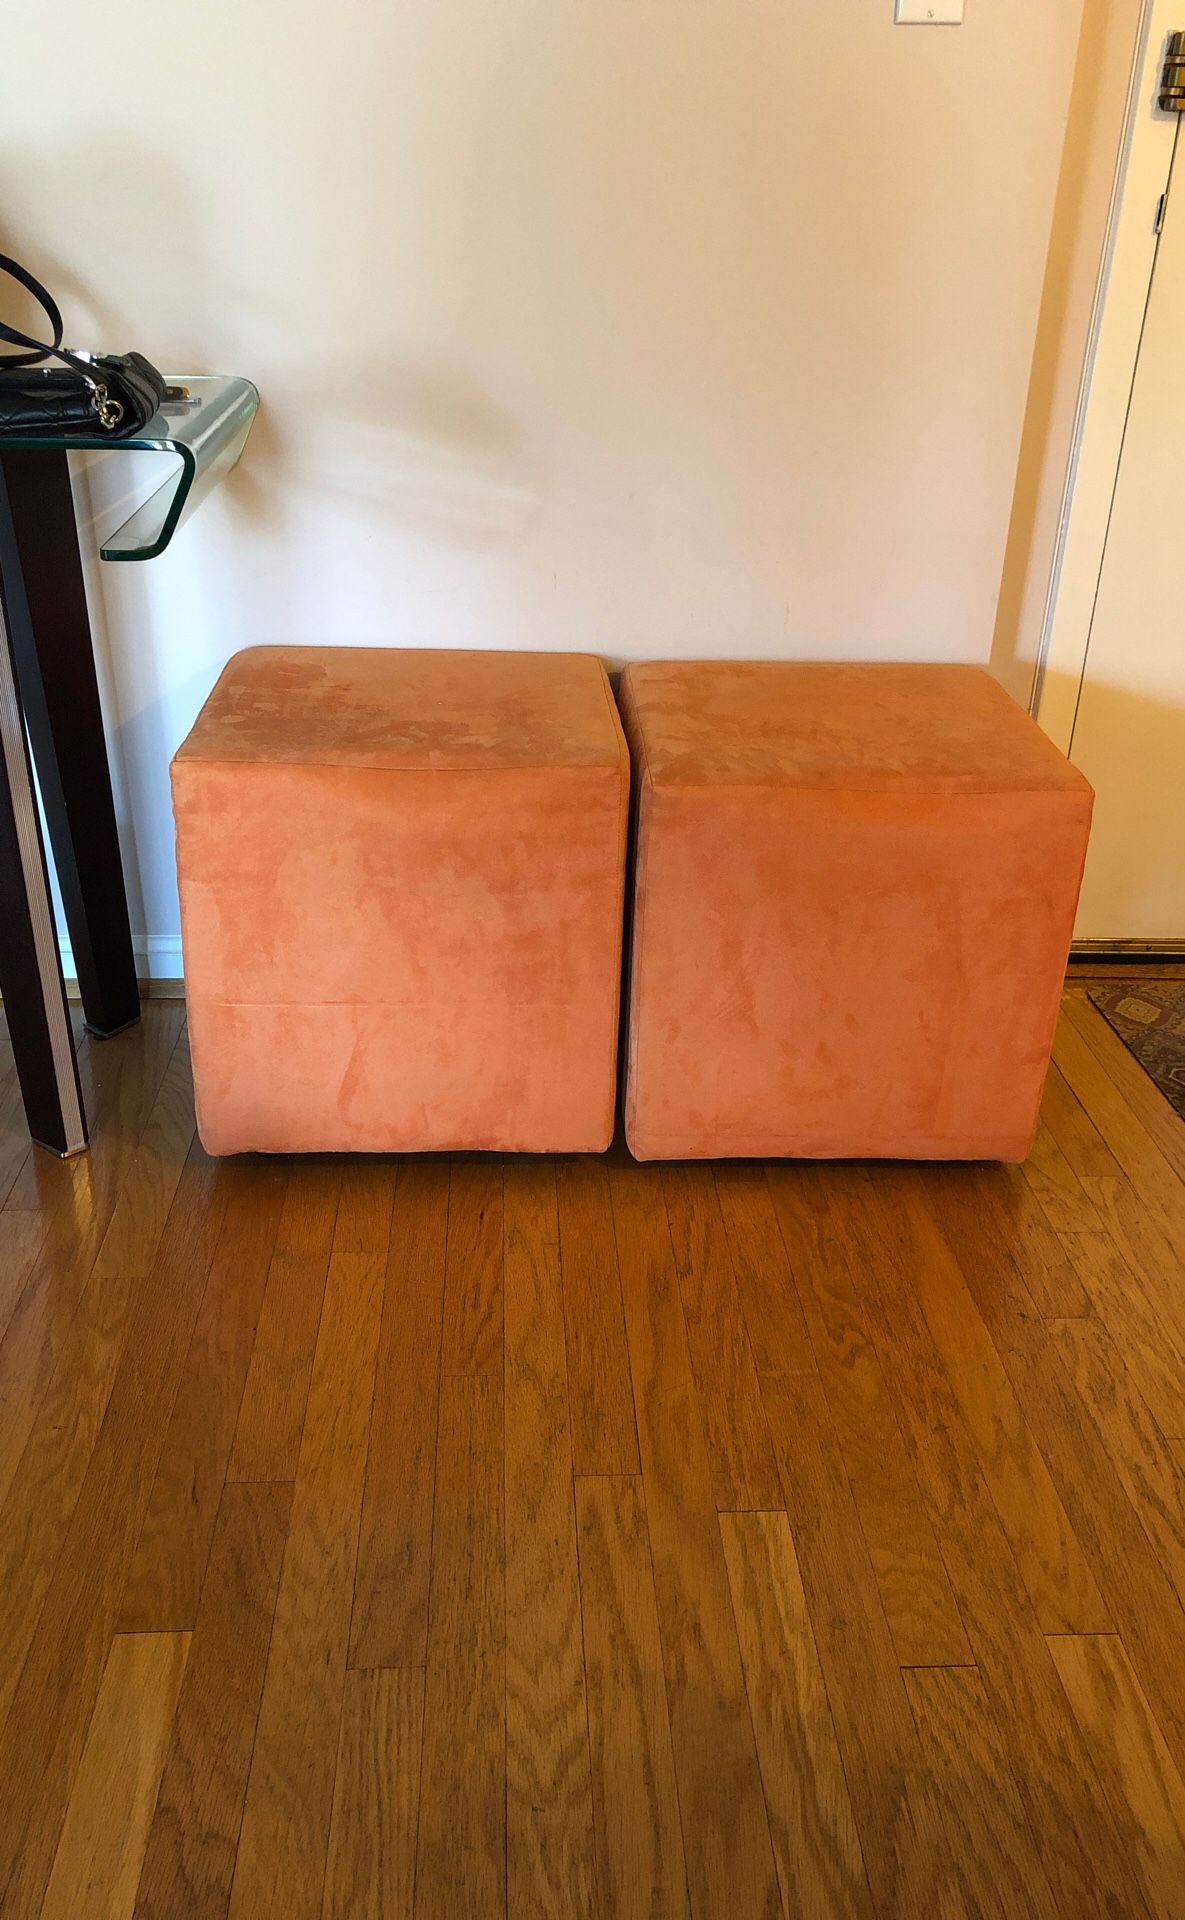 2 west elm orange cube chairs with wheels